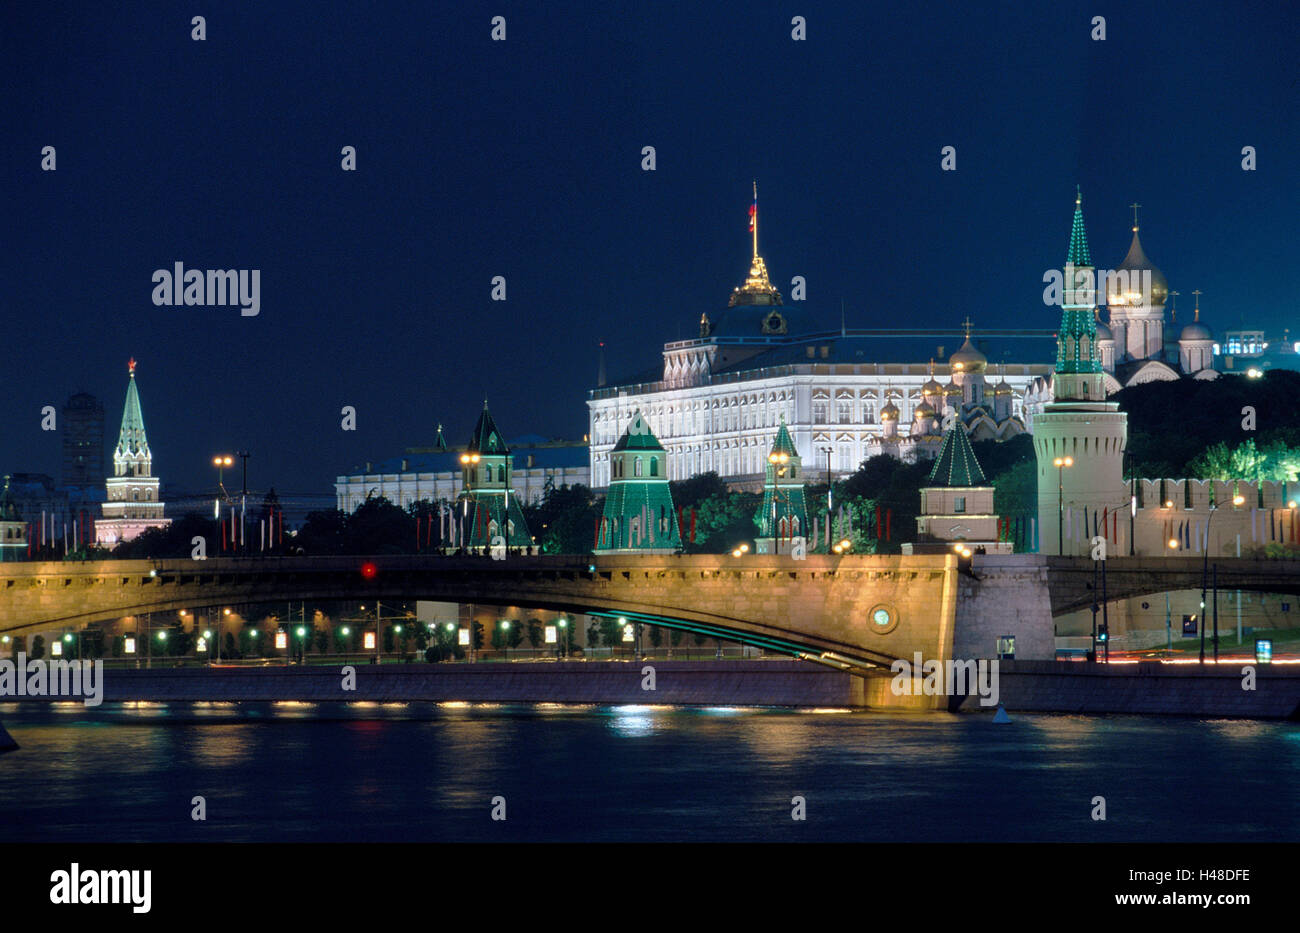 Russia, Moscow, town view, Kremlin, river Moscow, evening, capital, Kremlin palace, towers, churches, cathedrals, Kremlin palace, place of interest, landmark, culture, tourism, structure, architecture, lights, bridge, Stock Photo